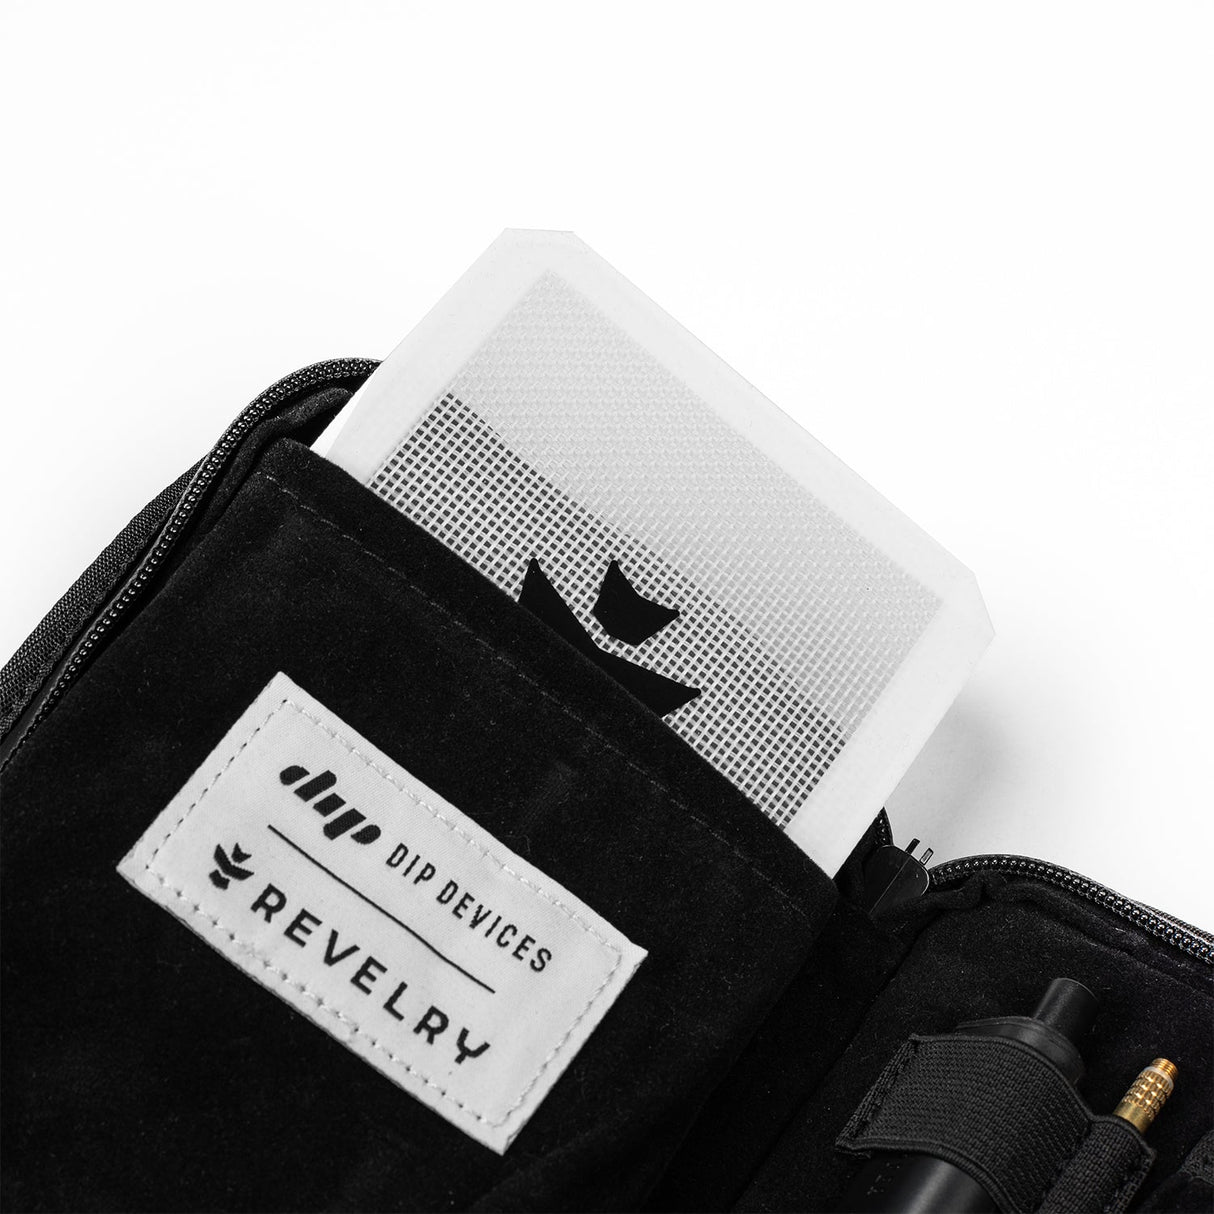 Revelry Supply's The Dab Kit - Smell Proof Kit Opened Showing Contents